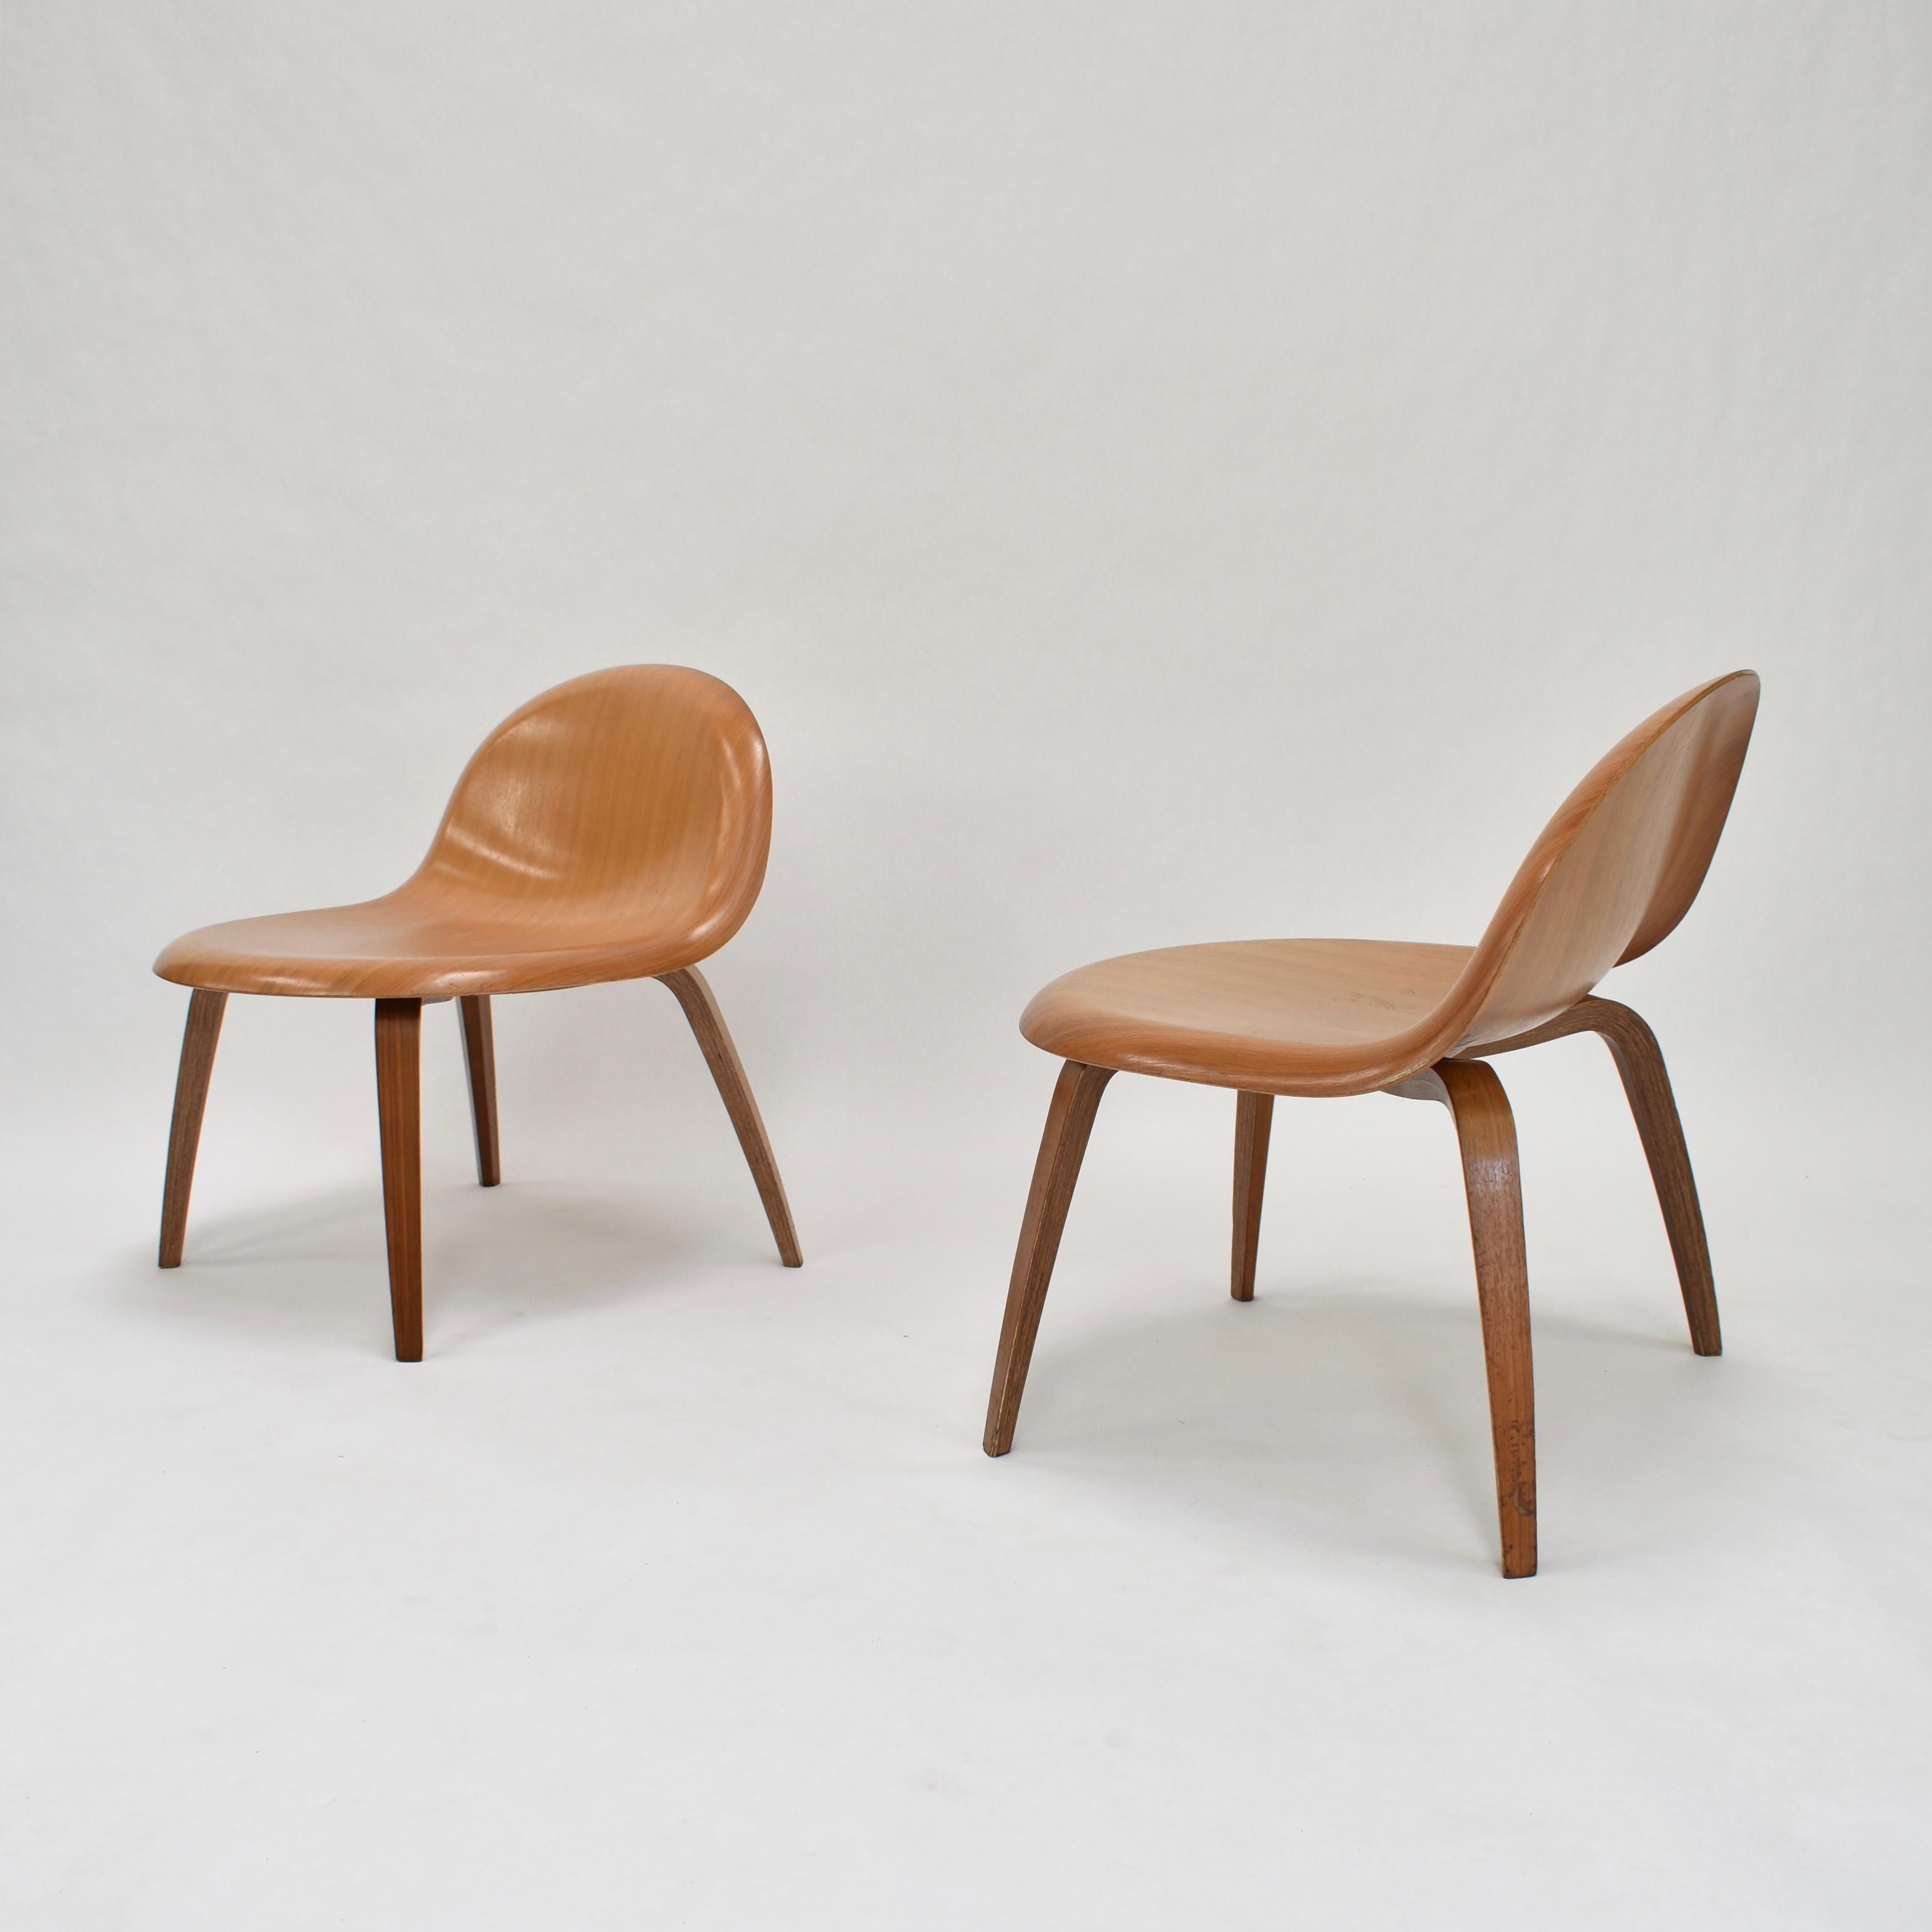 Scandinavian Modern Molded Plywood Lounge Chairs by Boris Berlin and Poul Christiansen for Komplot